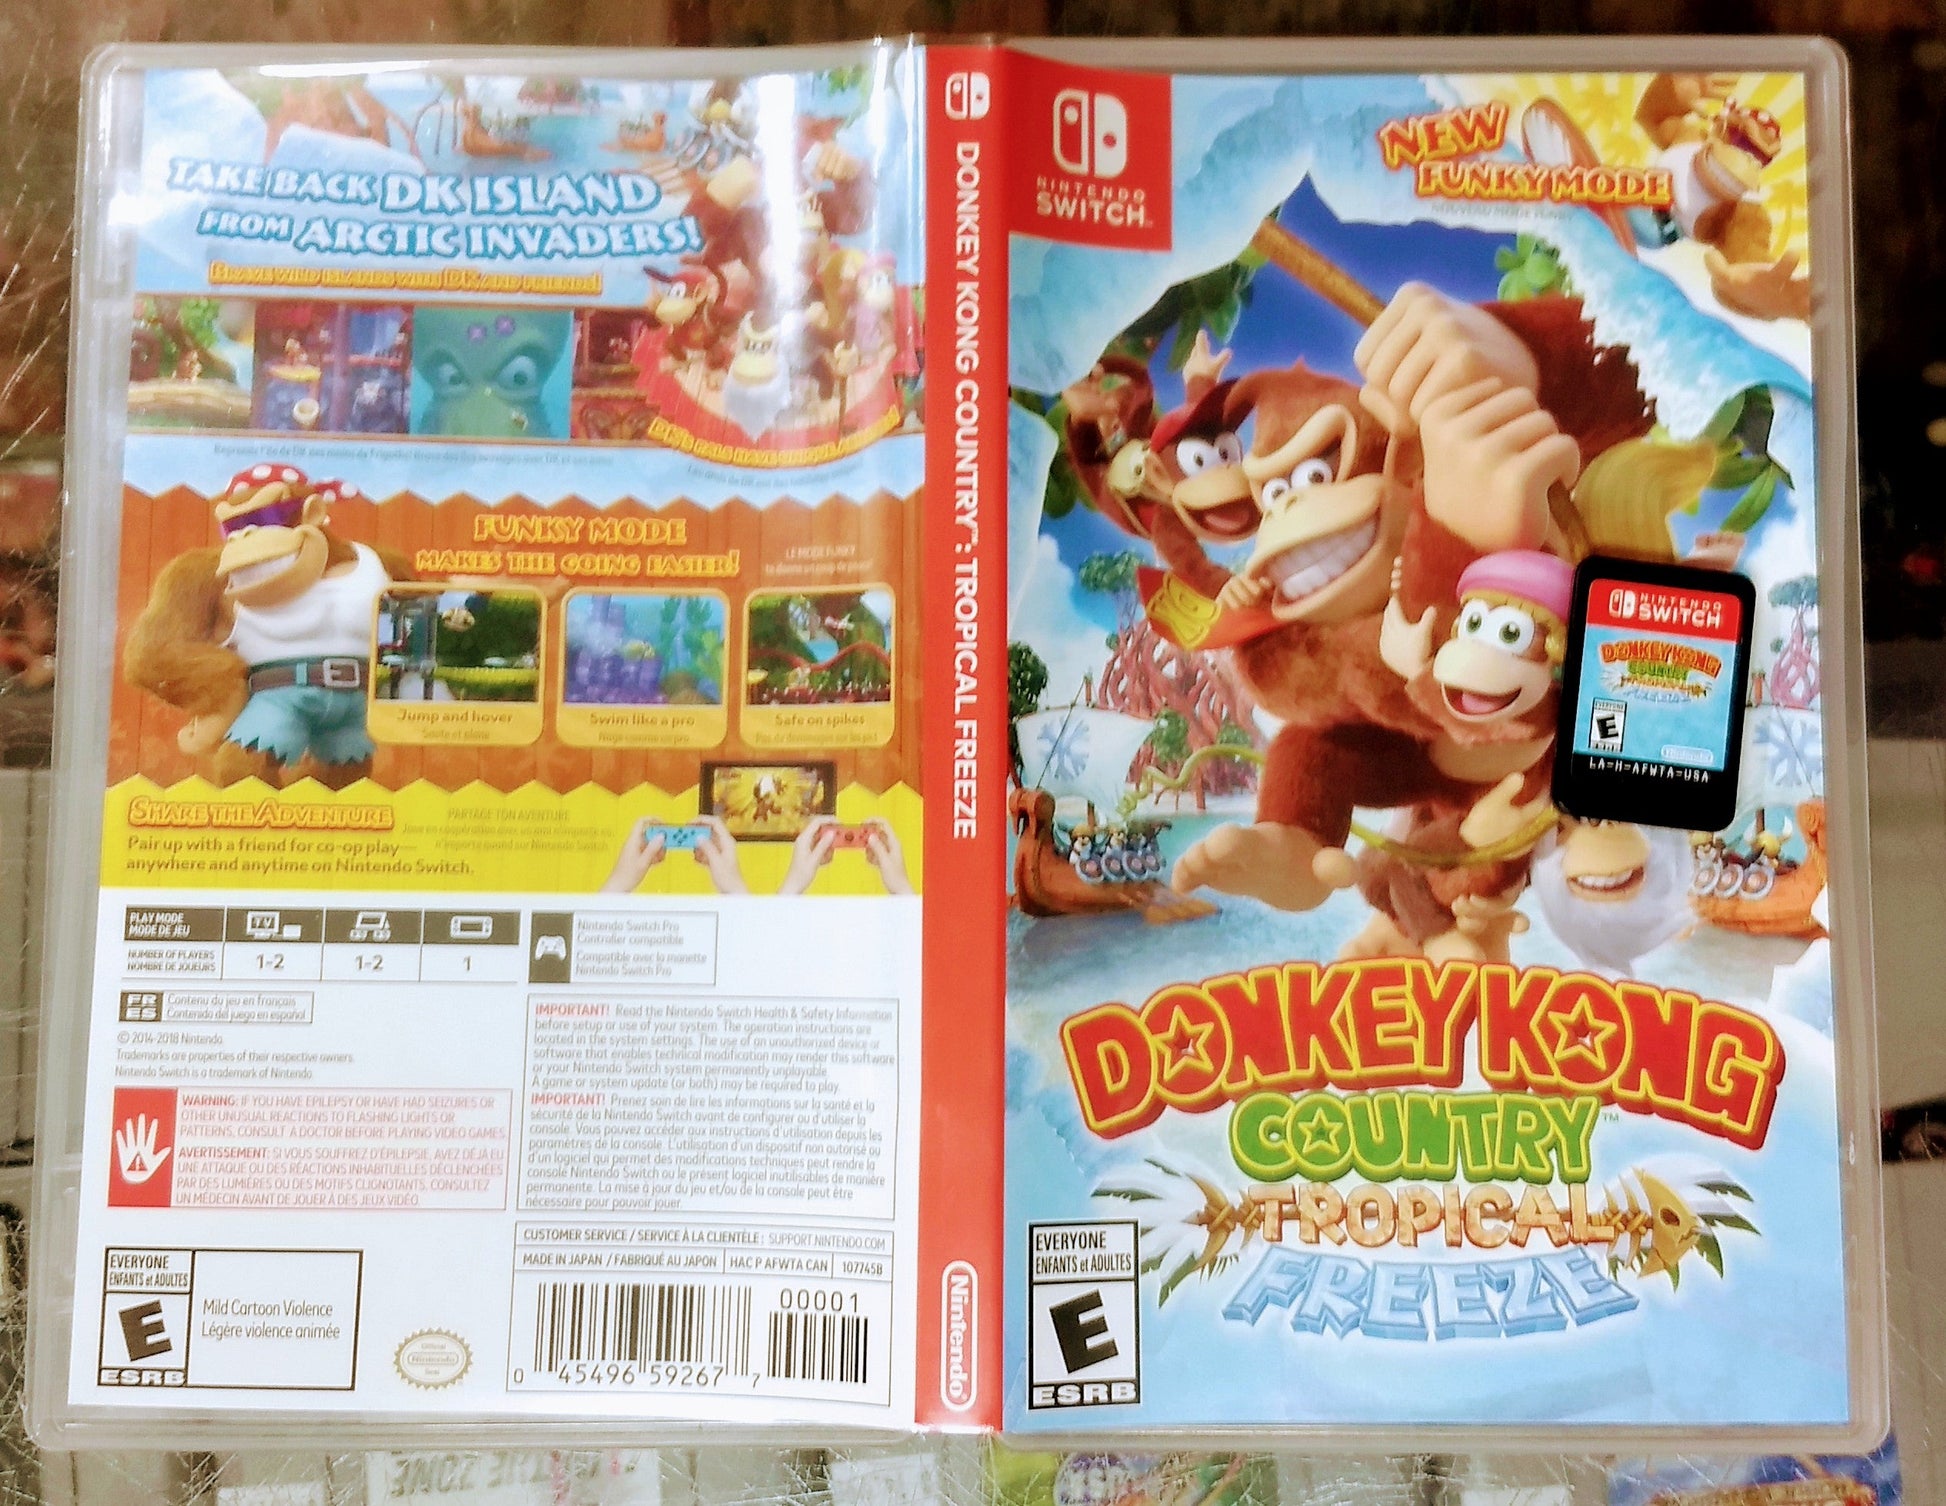 DONKEY KONG COUNTRY TROPICAL FREEZE (NINTENDO SWITCH) - jeux video game-x